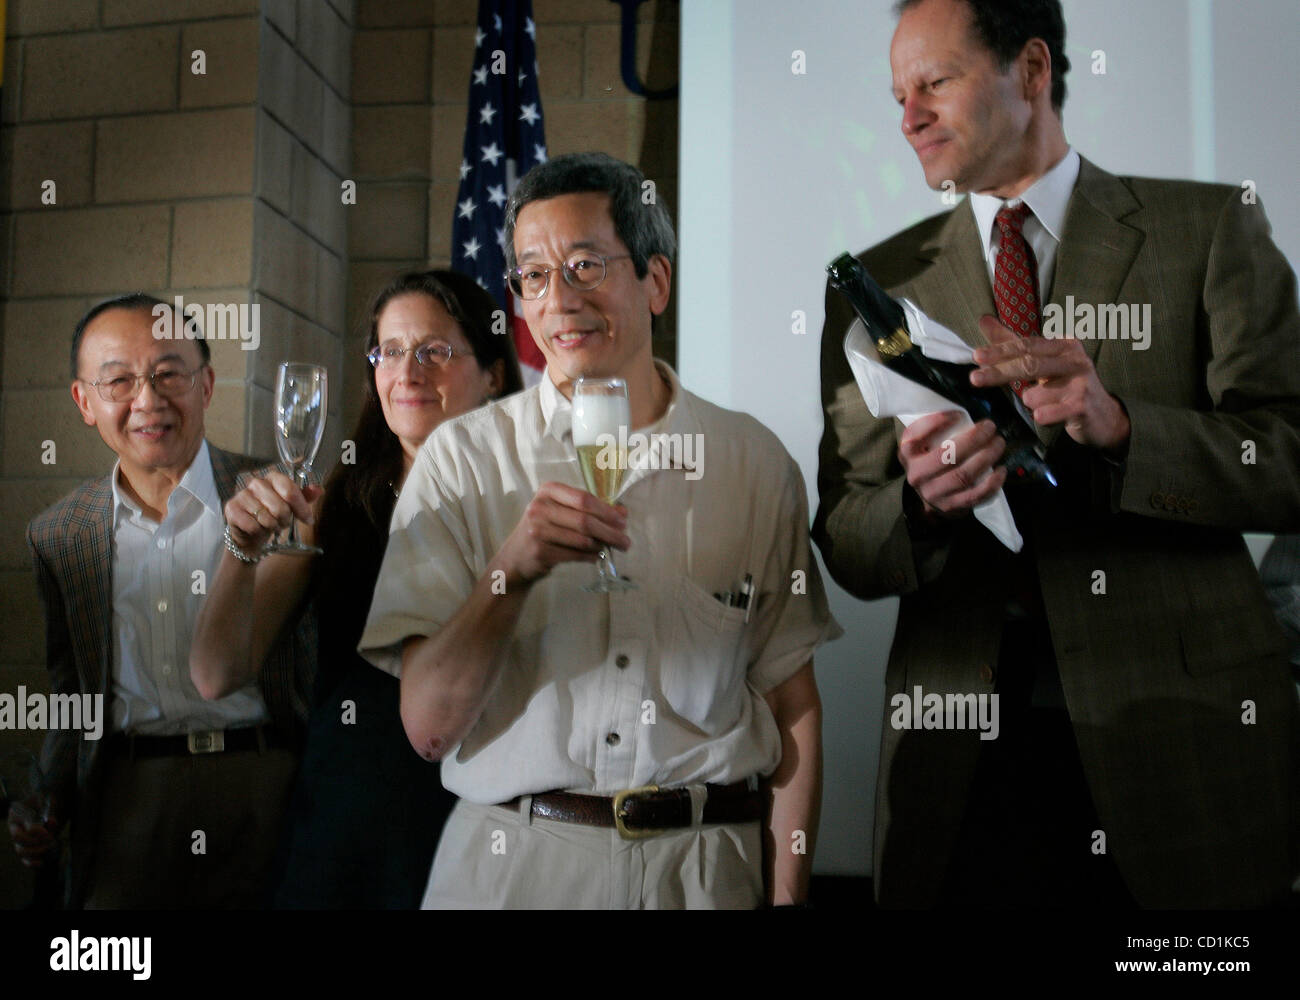 HLrogerTsienNoblePrize291097x002.jpg 10/08/2008 UCSD (San Diego, California) USA  ROGER (cq) TSIEN, second from right, a professor of pharmacology at UCSD holds his glass filled with champaign as David Brenner, M.D., right, Vice Chancellor for Health Sciences and Dean of the School of Medicine, SHU  Stock Photo